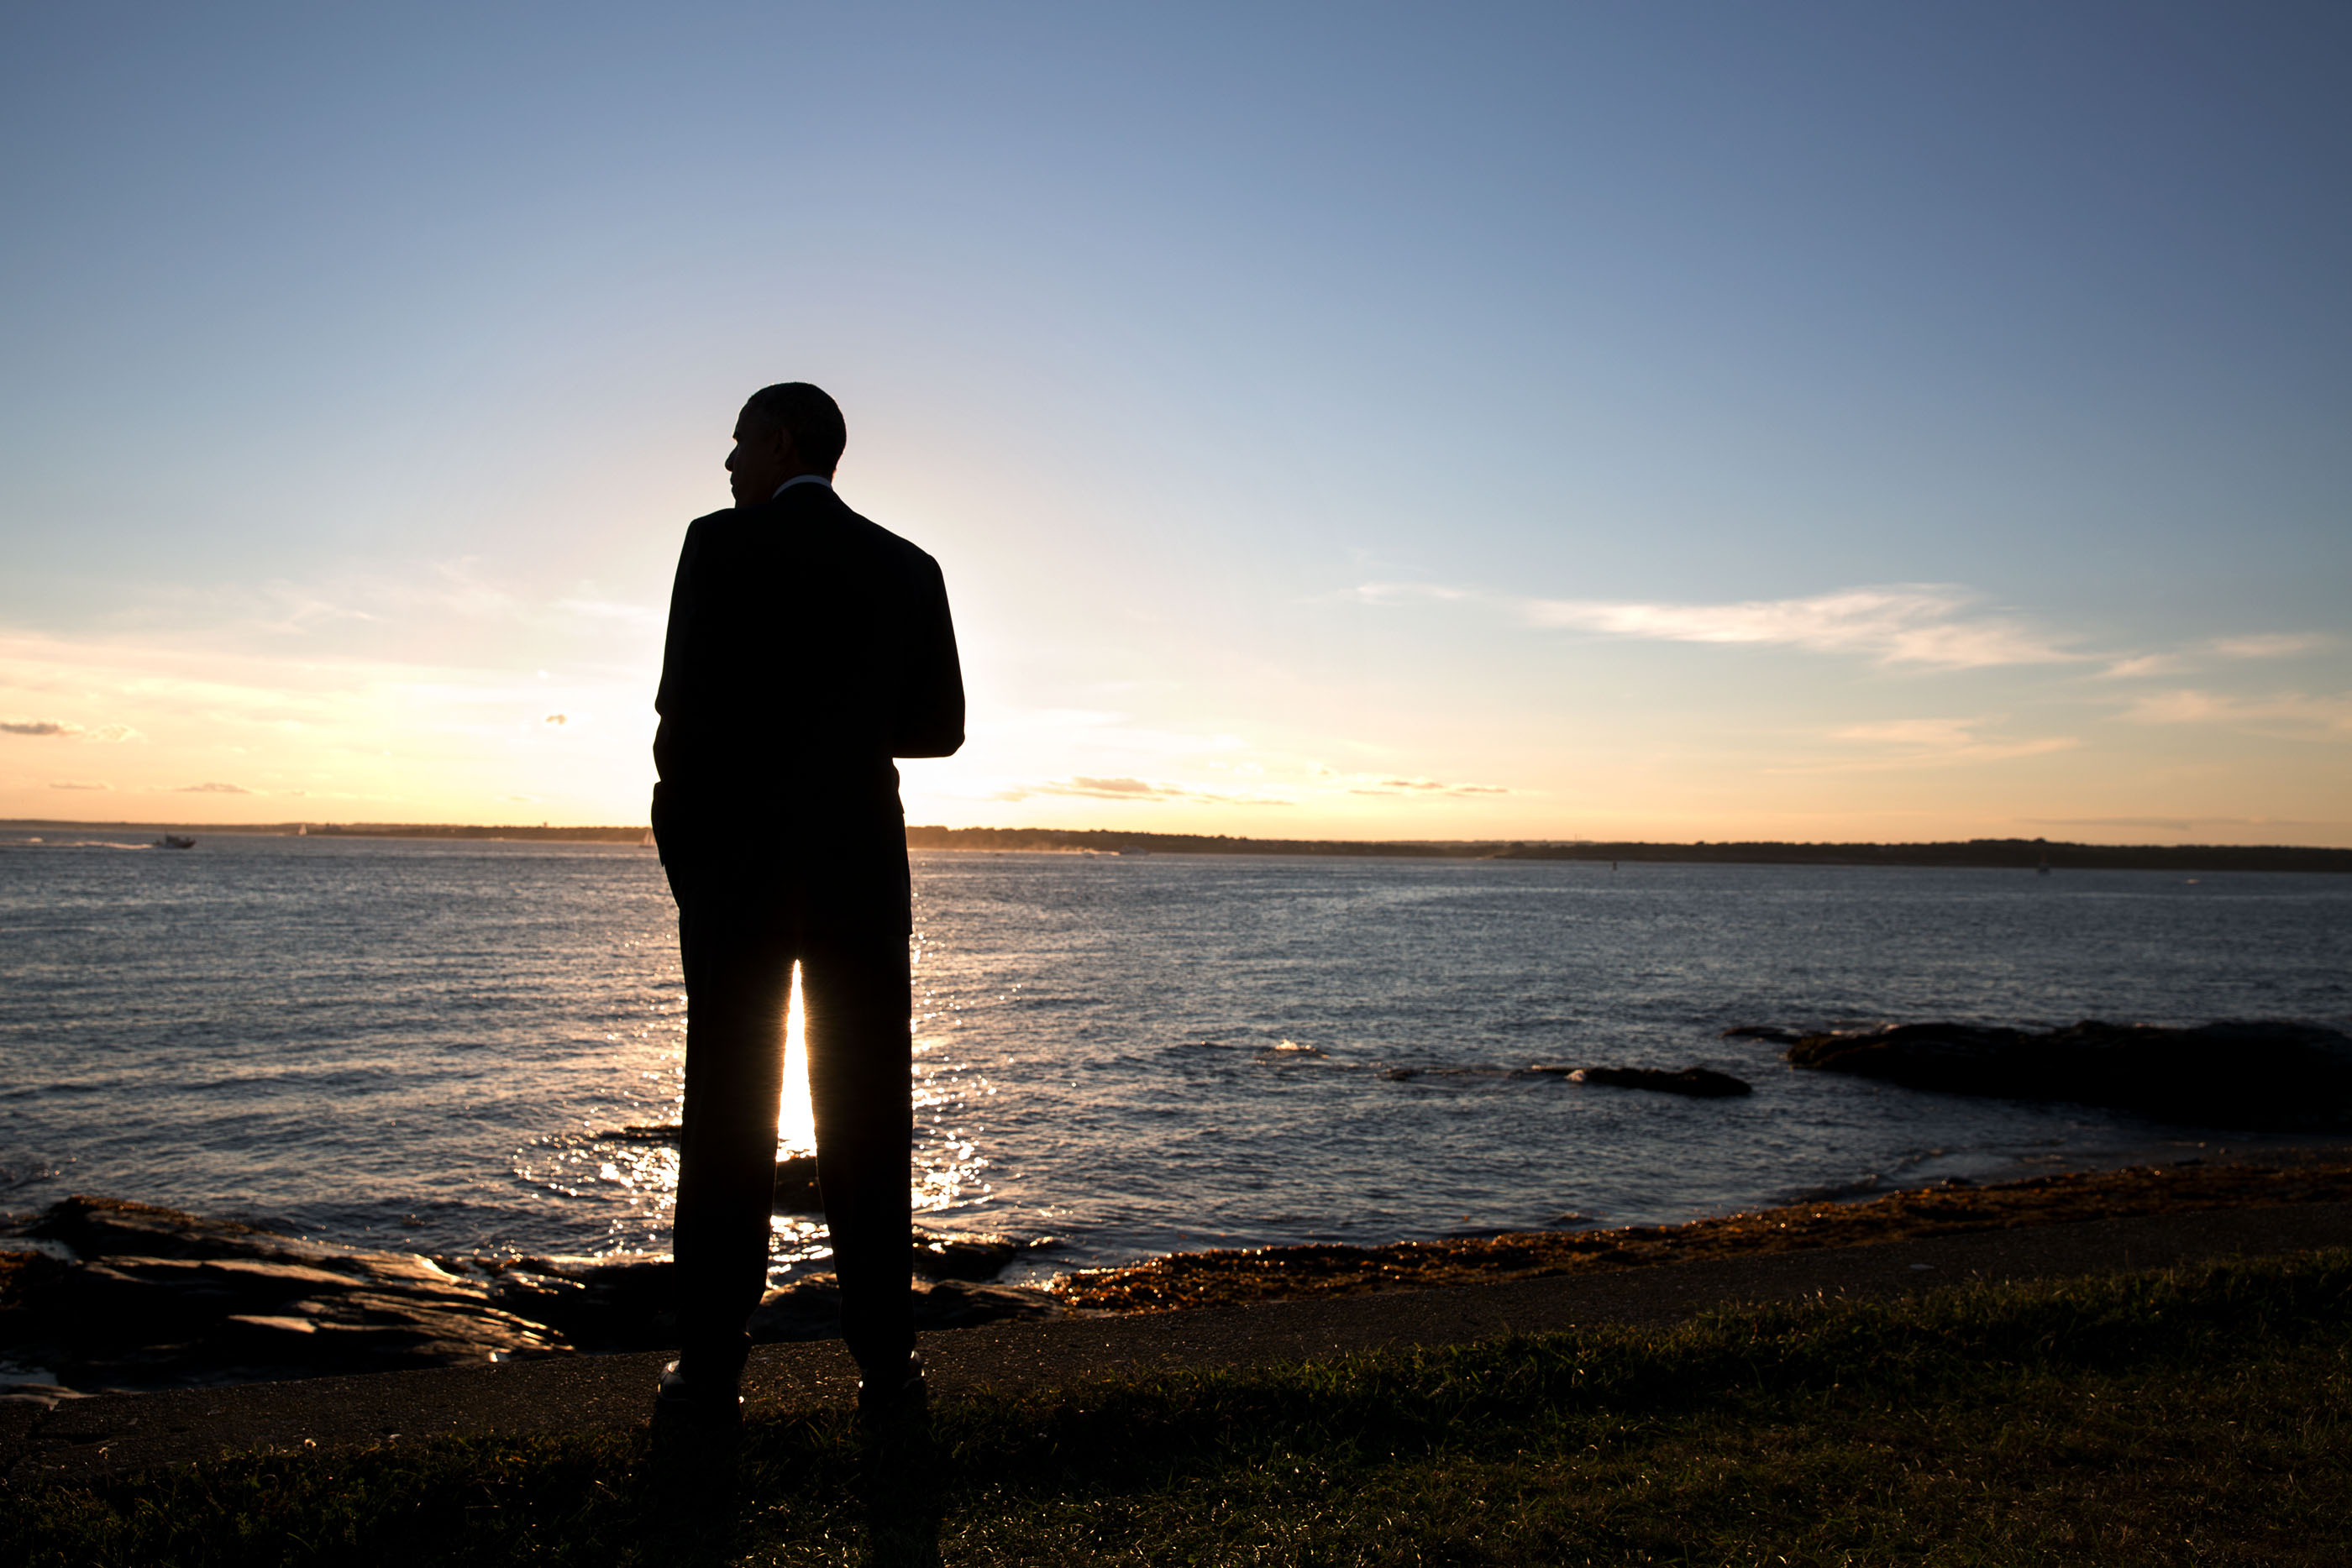 Rhode Island, Aug. 29, 2014. Viewing the ocean at Brenton Point in Newport. (Official White House Photo by Pete Souza)